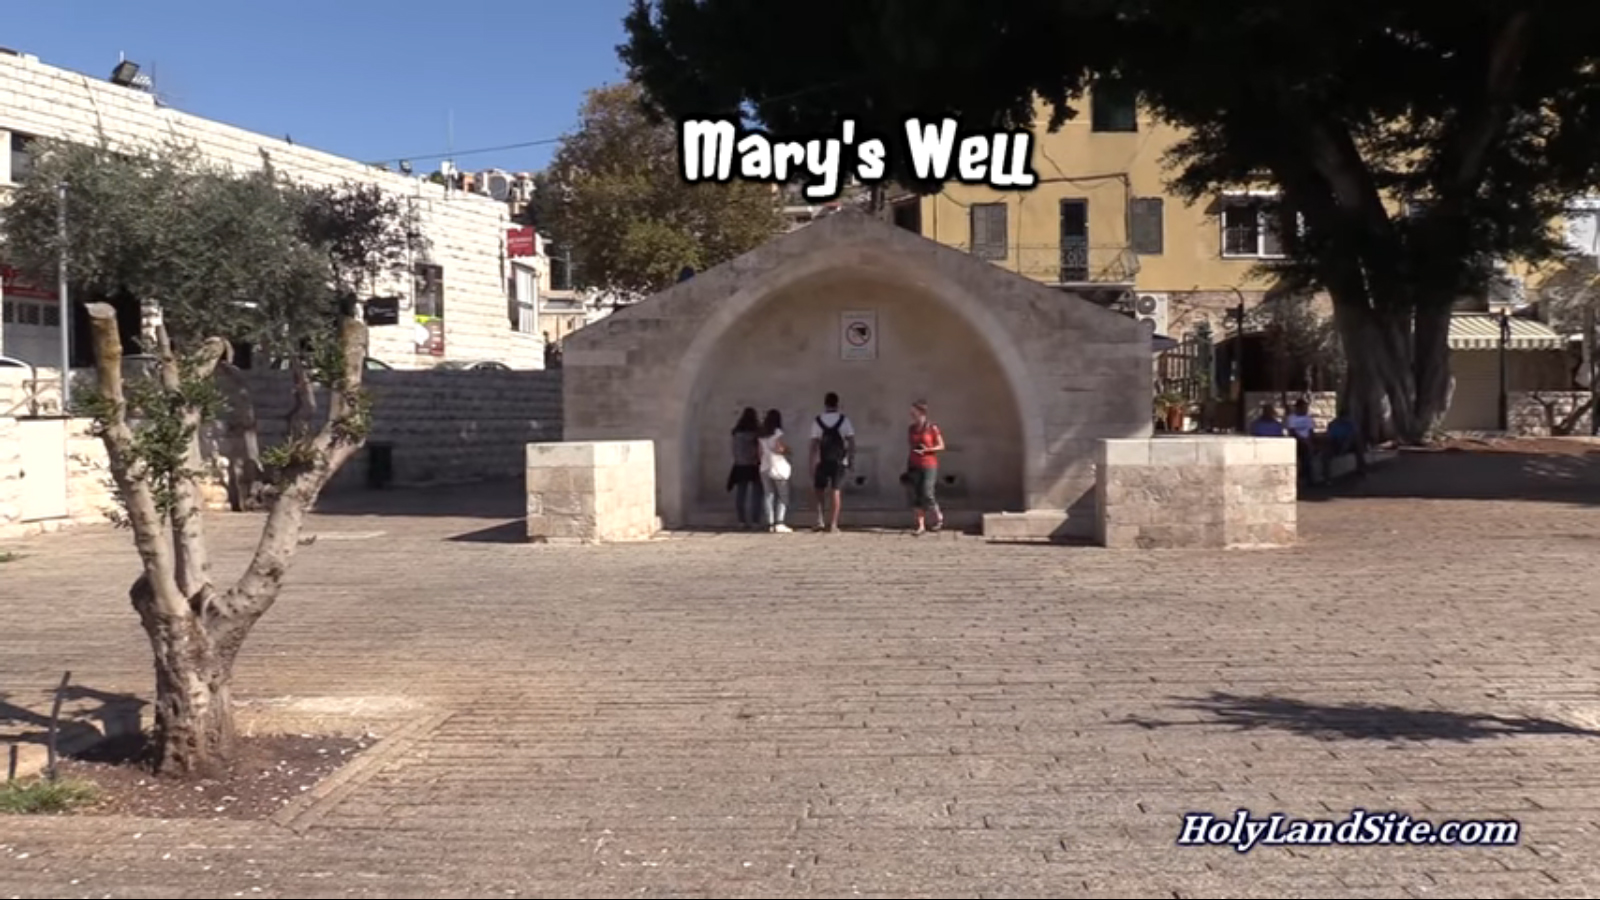 Mary's well